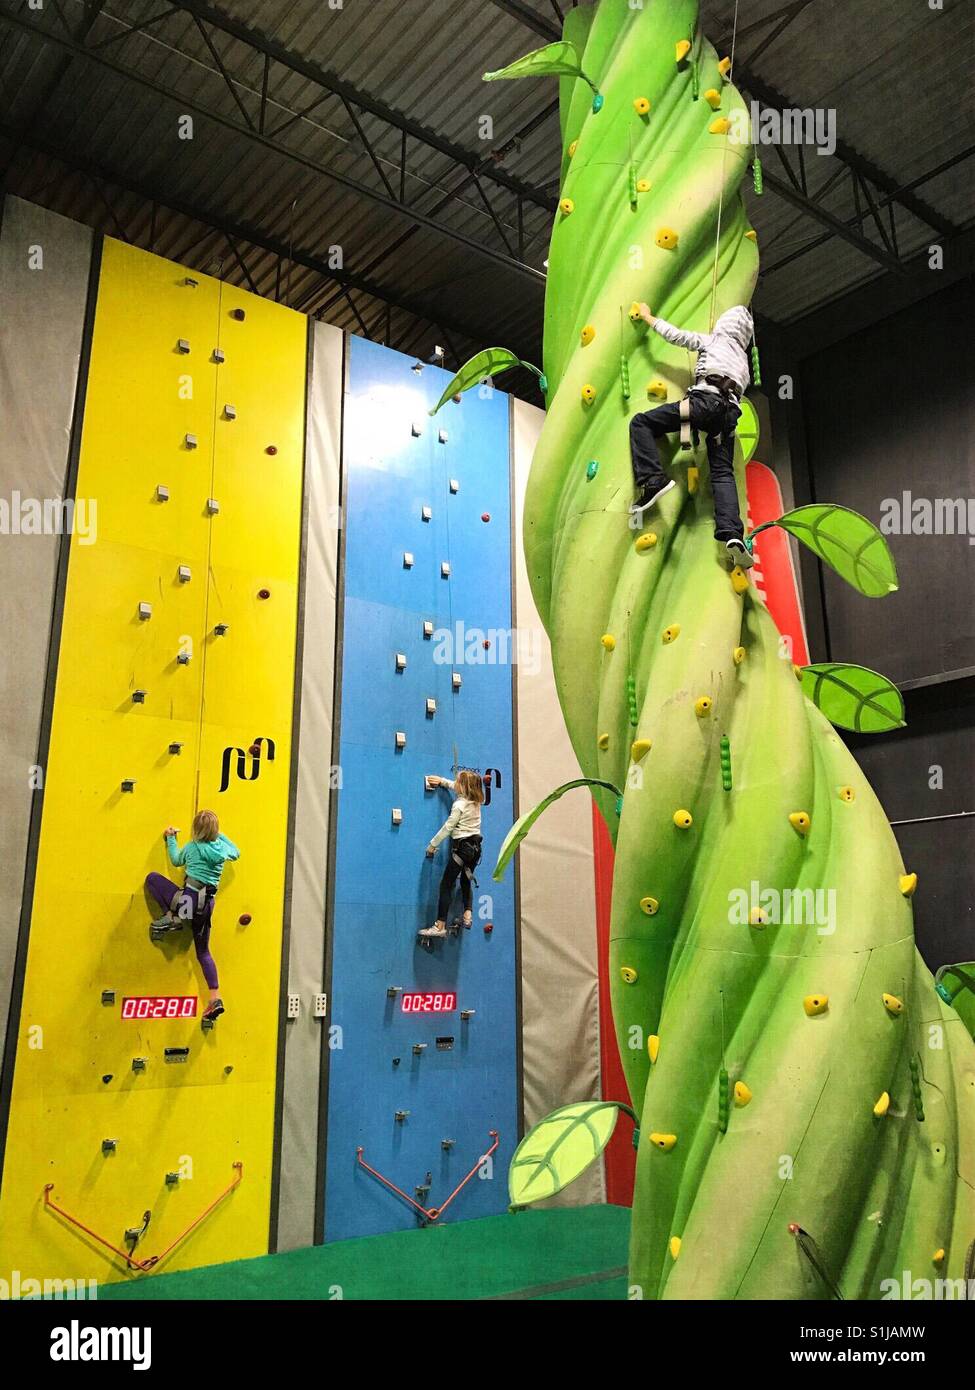 Children climb different structures at an indoor climbing park. Stock Photo